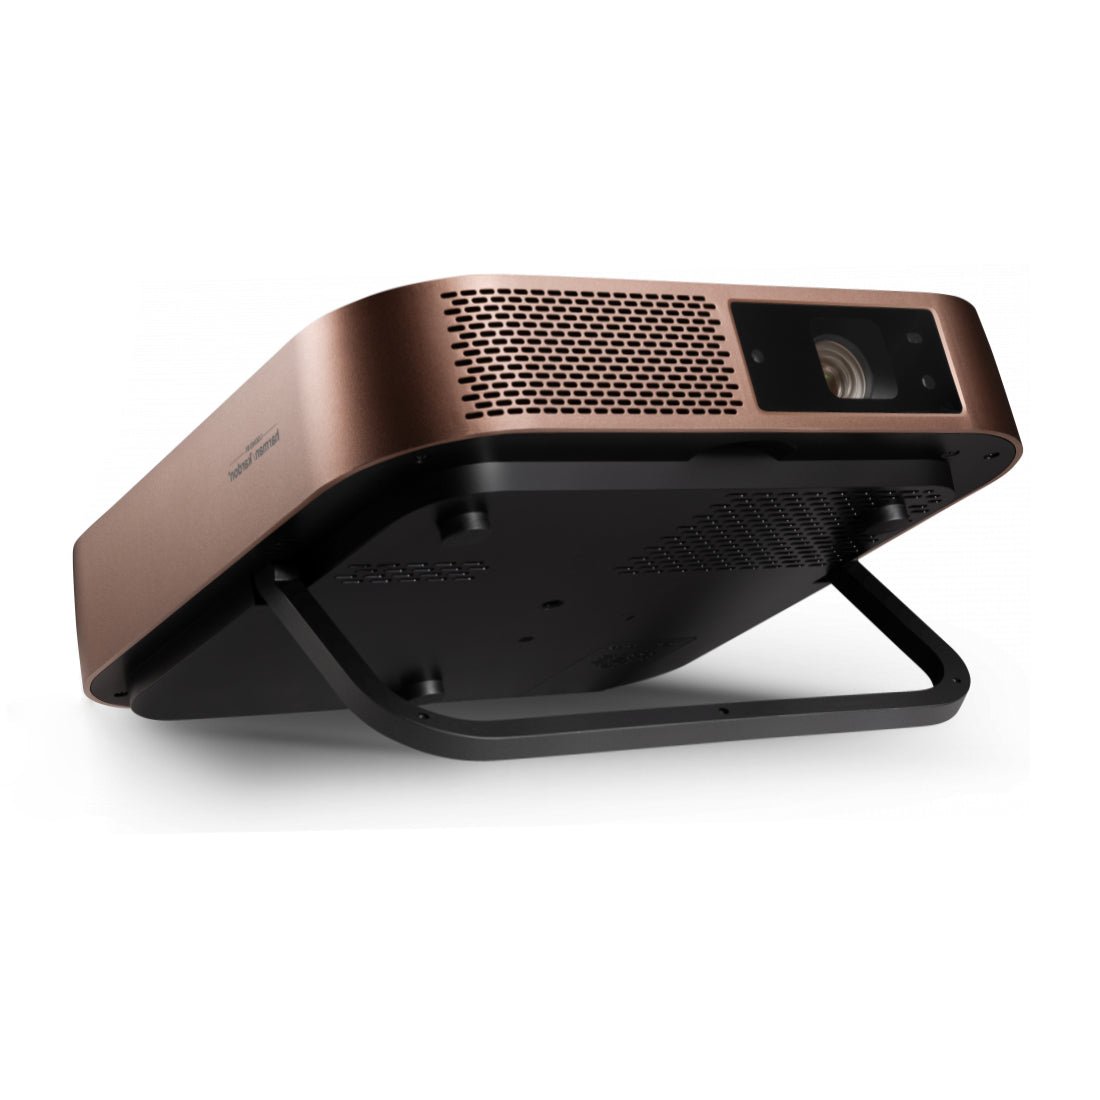 (Pre-Owned) Viewsonic M2 Wireless Ultra Slim Projector - جهاز عرض - Store 974 | ستور ٩٧٤